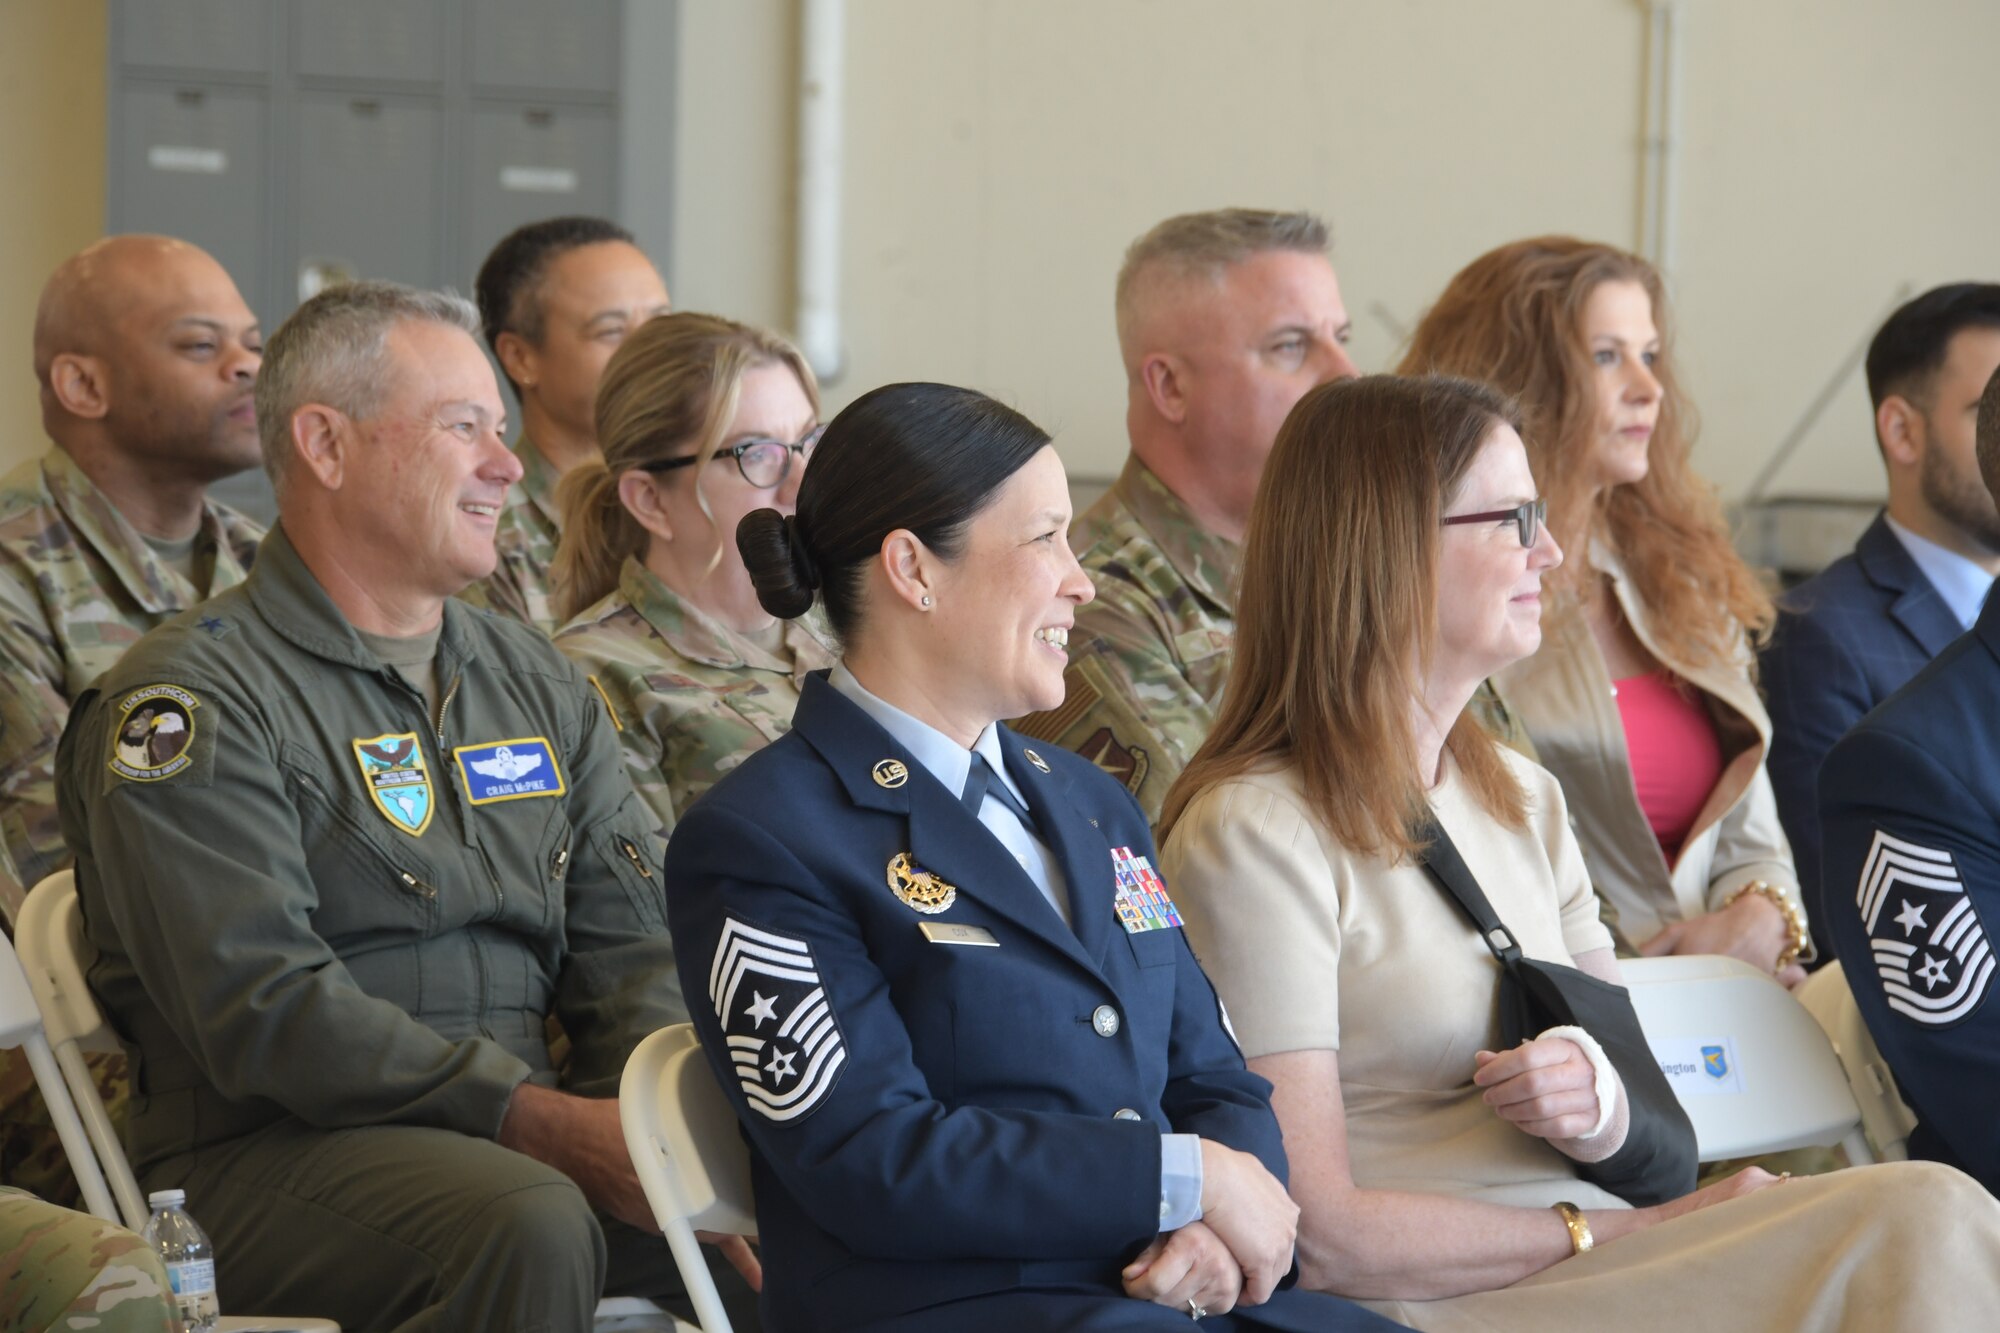 Audience members laugh during a speech from Air Force Reserve Commander and Chief of the Air Force Reserve Lt. Gen. John P Healy during the 22nd Air Force Change of Command Ceremony, held at Dobbins Air Reserve Base, Georgia, April 2, 2023.